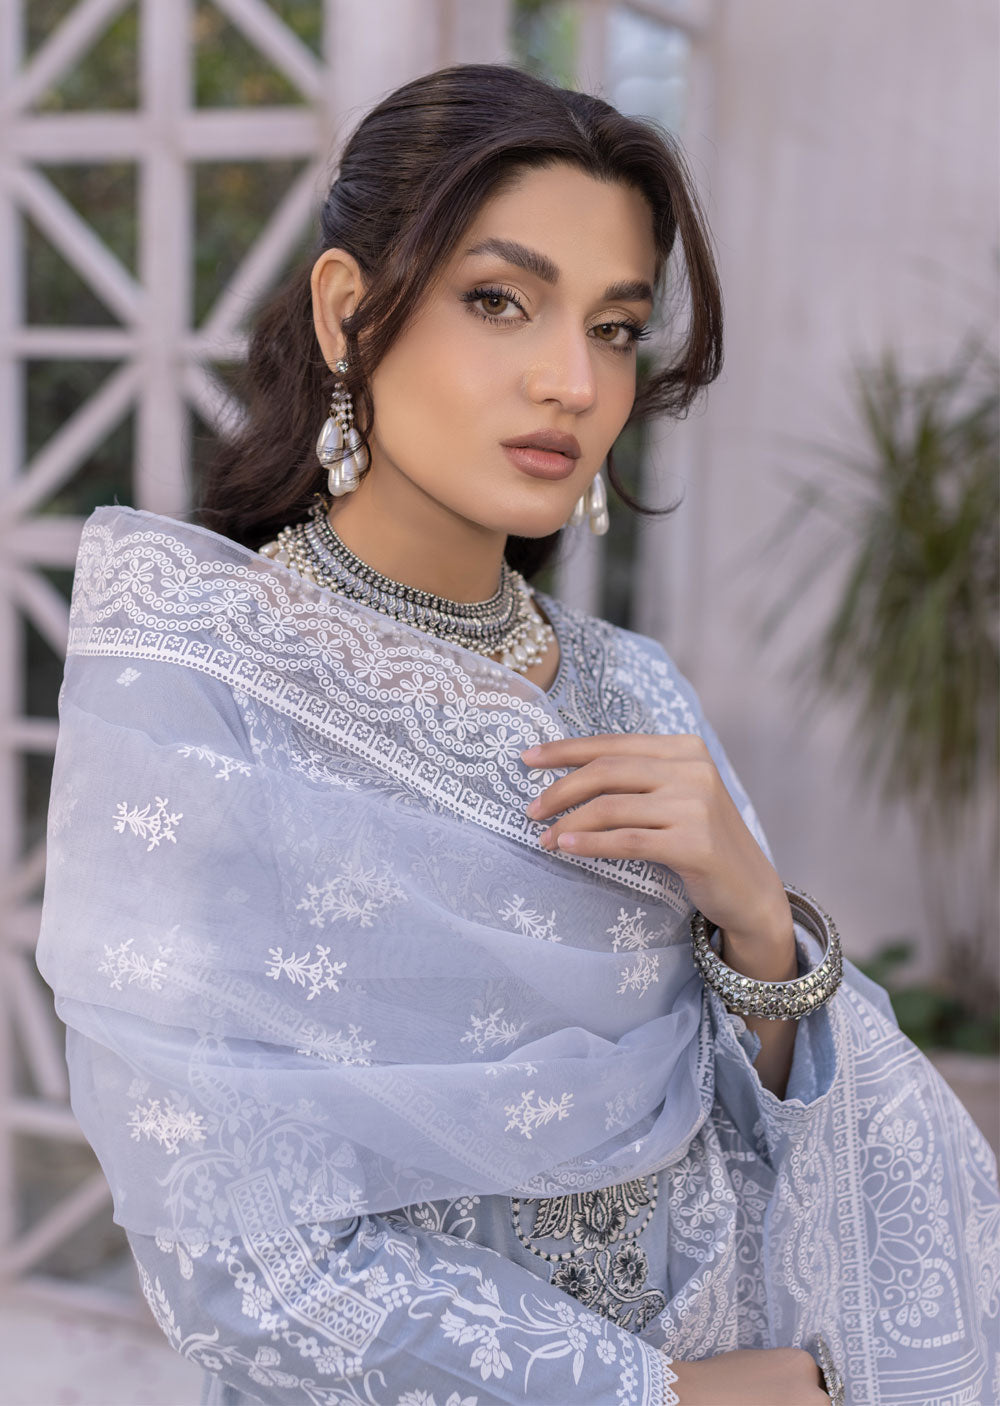 MDM-64 - Readymade - Embroidered Cotton Suit - Memsaab Online